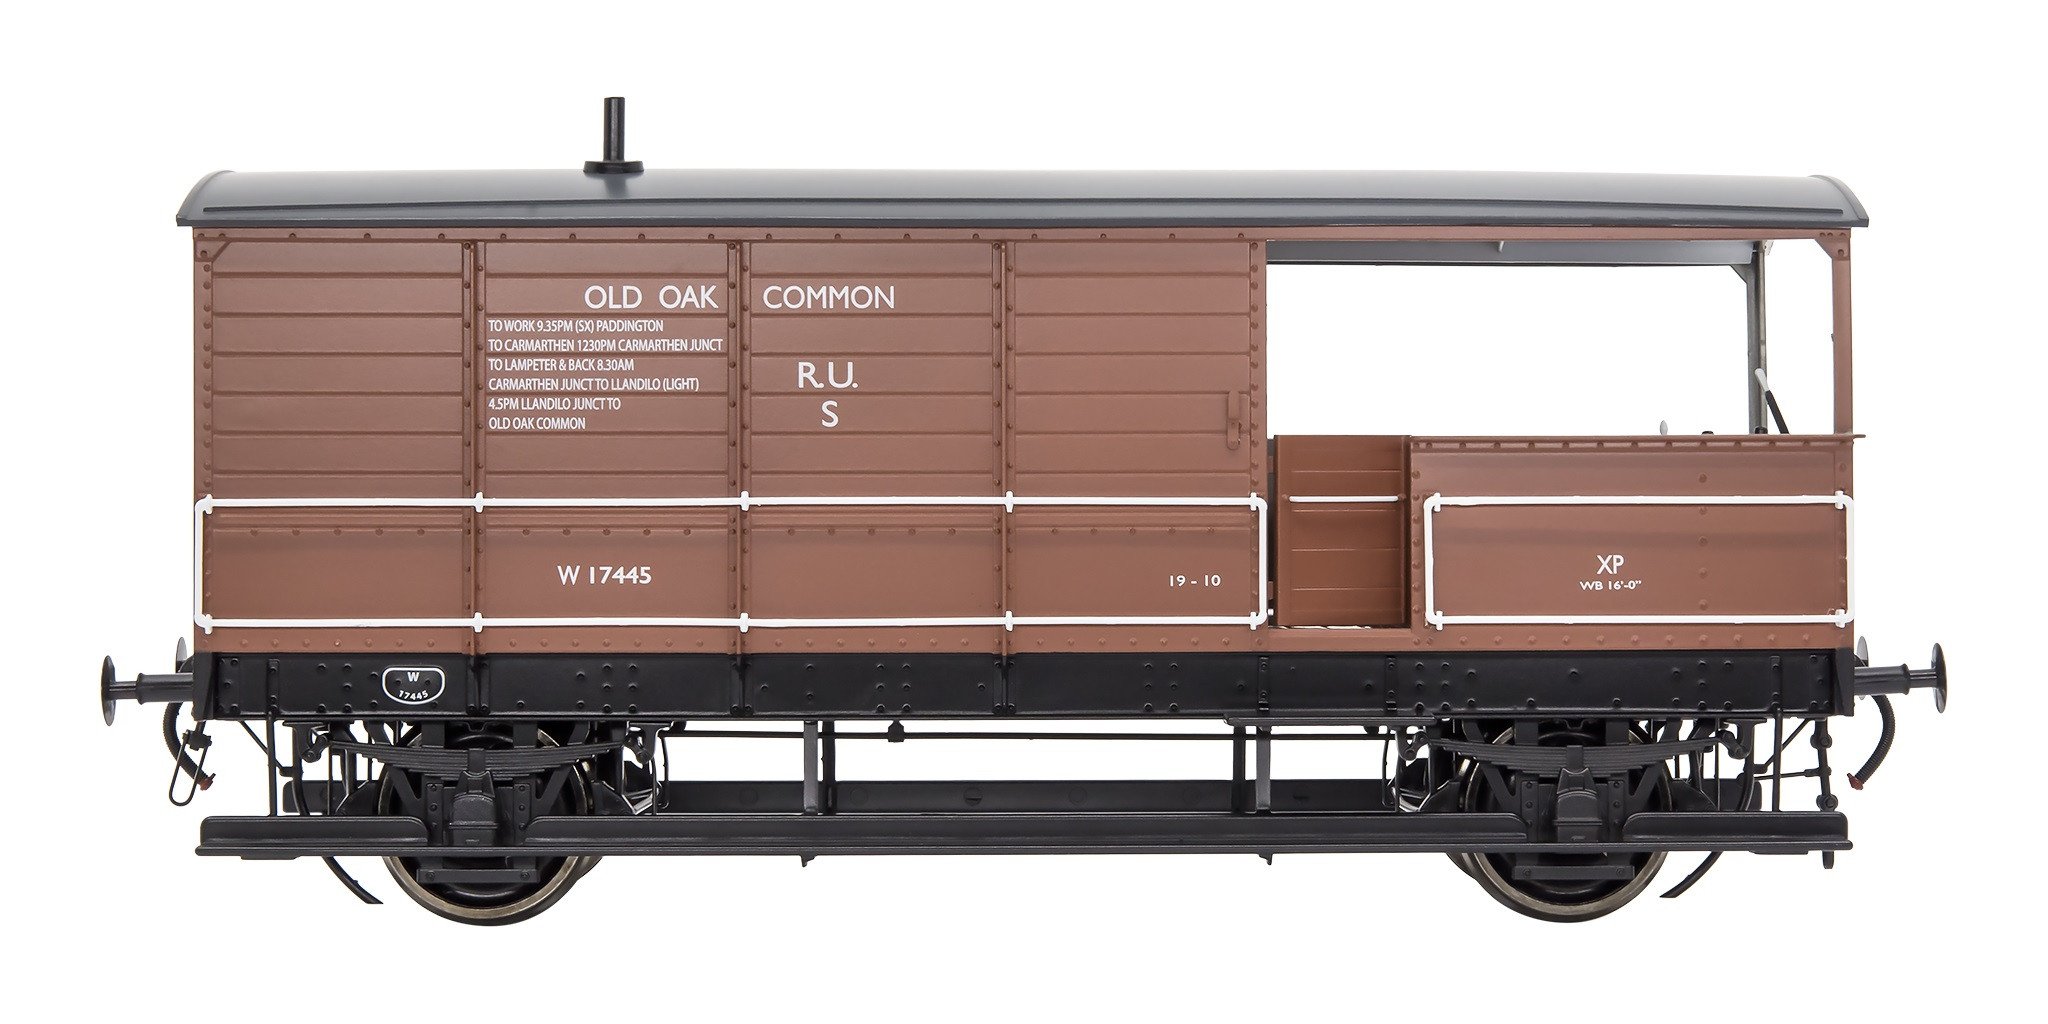 BR liveried examples are also set to be produced.